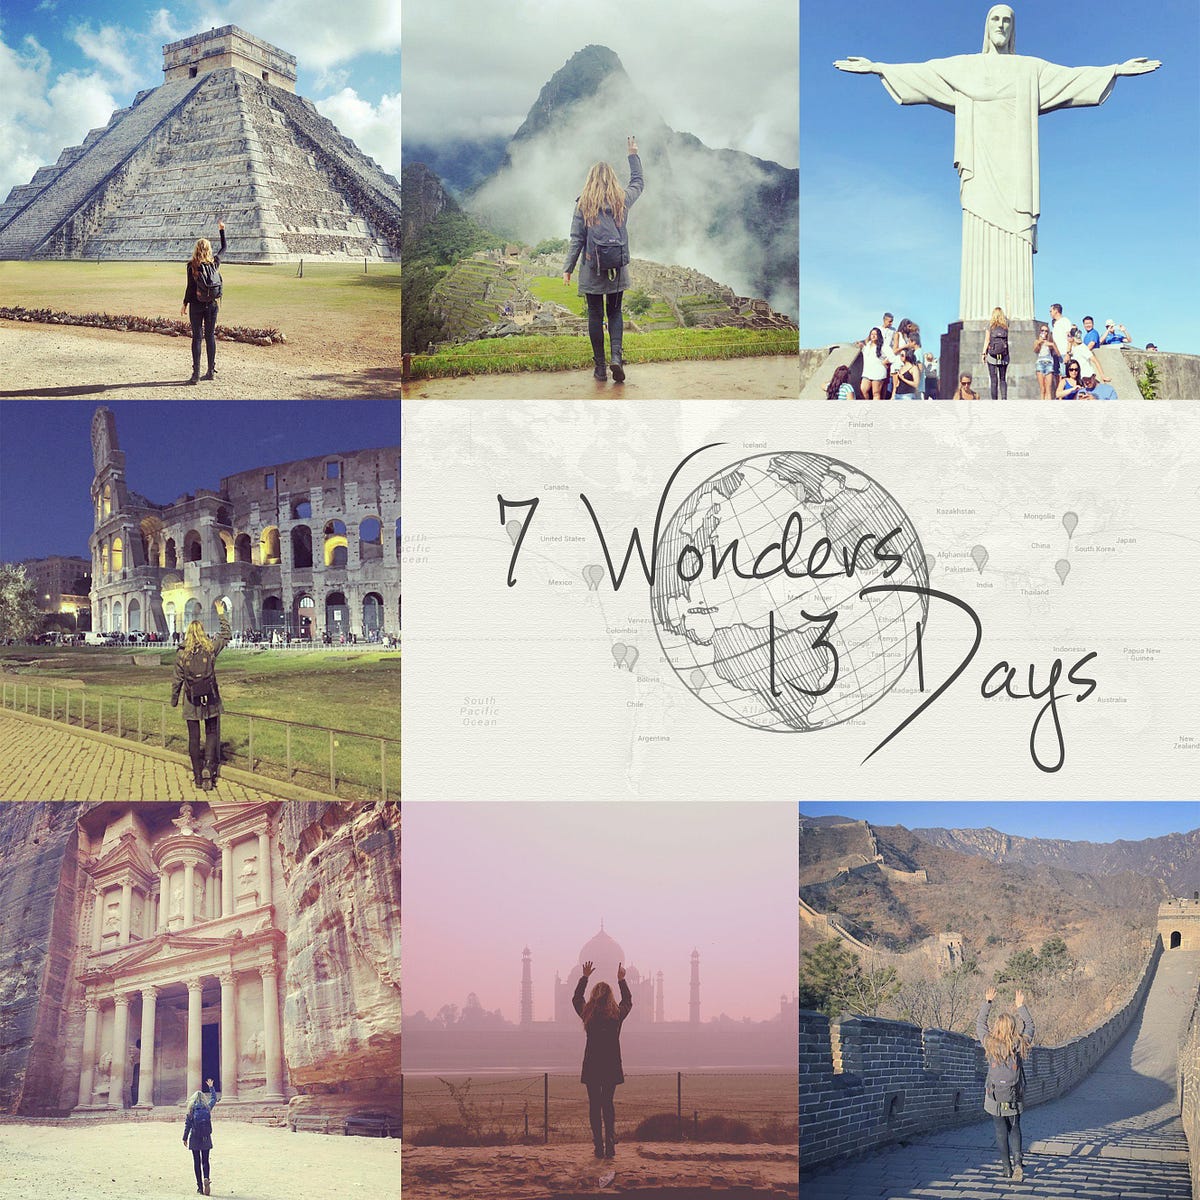 How to Travel to the 7 Wonders of the World in 13 Days, by Megan Sullivan